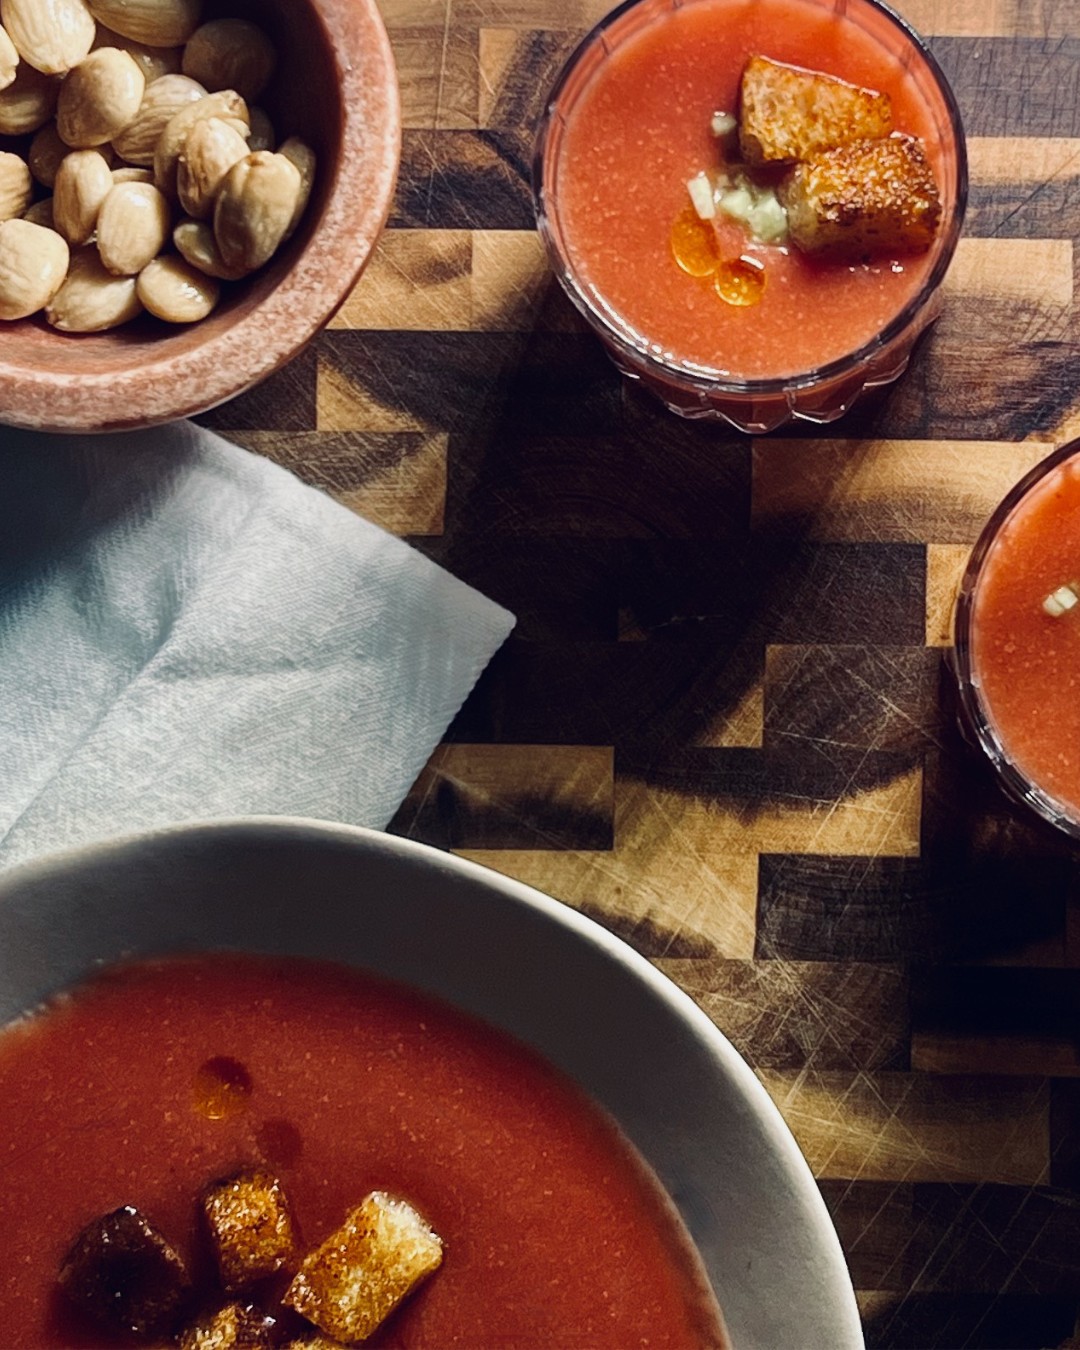 This gazpacho soup recipe is simple yet magical. Better yet, you don't have to turn on the oven. Use up that bounty from the garden to whip this up in no time. The combination of tomatoes, bread, cucumbers, bell pepper, oil, garlic, and sherry vinegar in the Spanish soup is fabulous as a starter, main dish, or even an amuse-bouche. Try serving it in shot glasses for tapas!